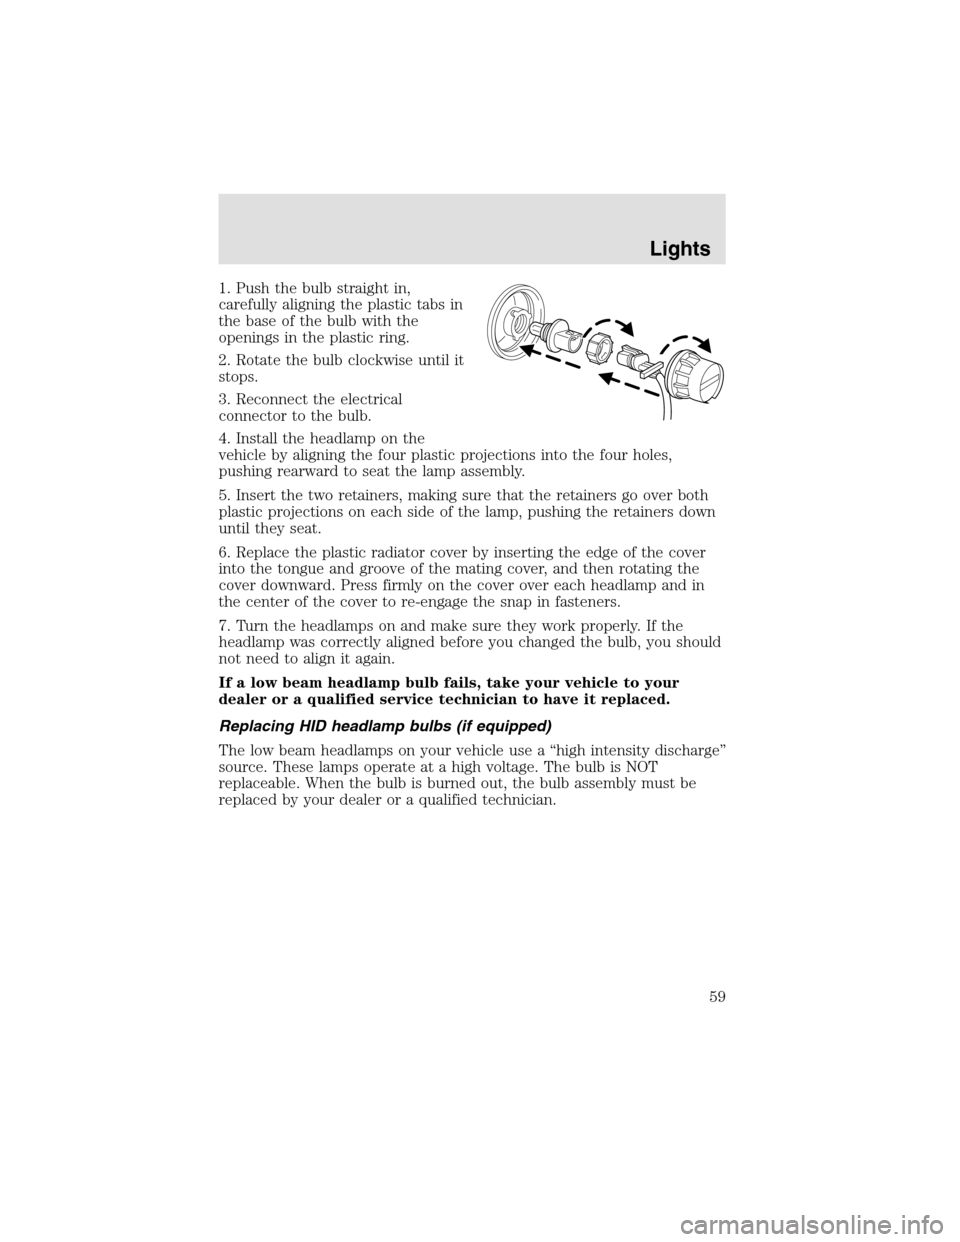 LINCOLN AVIATOR 2003 Workshop Manual 1. Push the bulb straight in,
carefully aligning the plastic tabs in
the base of the bulb with the
openings in the plastic ring.
2. Rotate the bulb clockwise until it
stops.
3. Reconnect the electrica